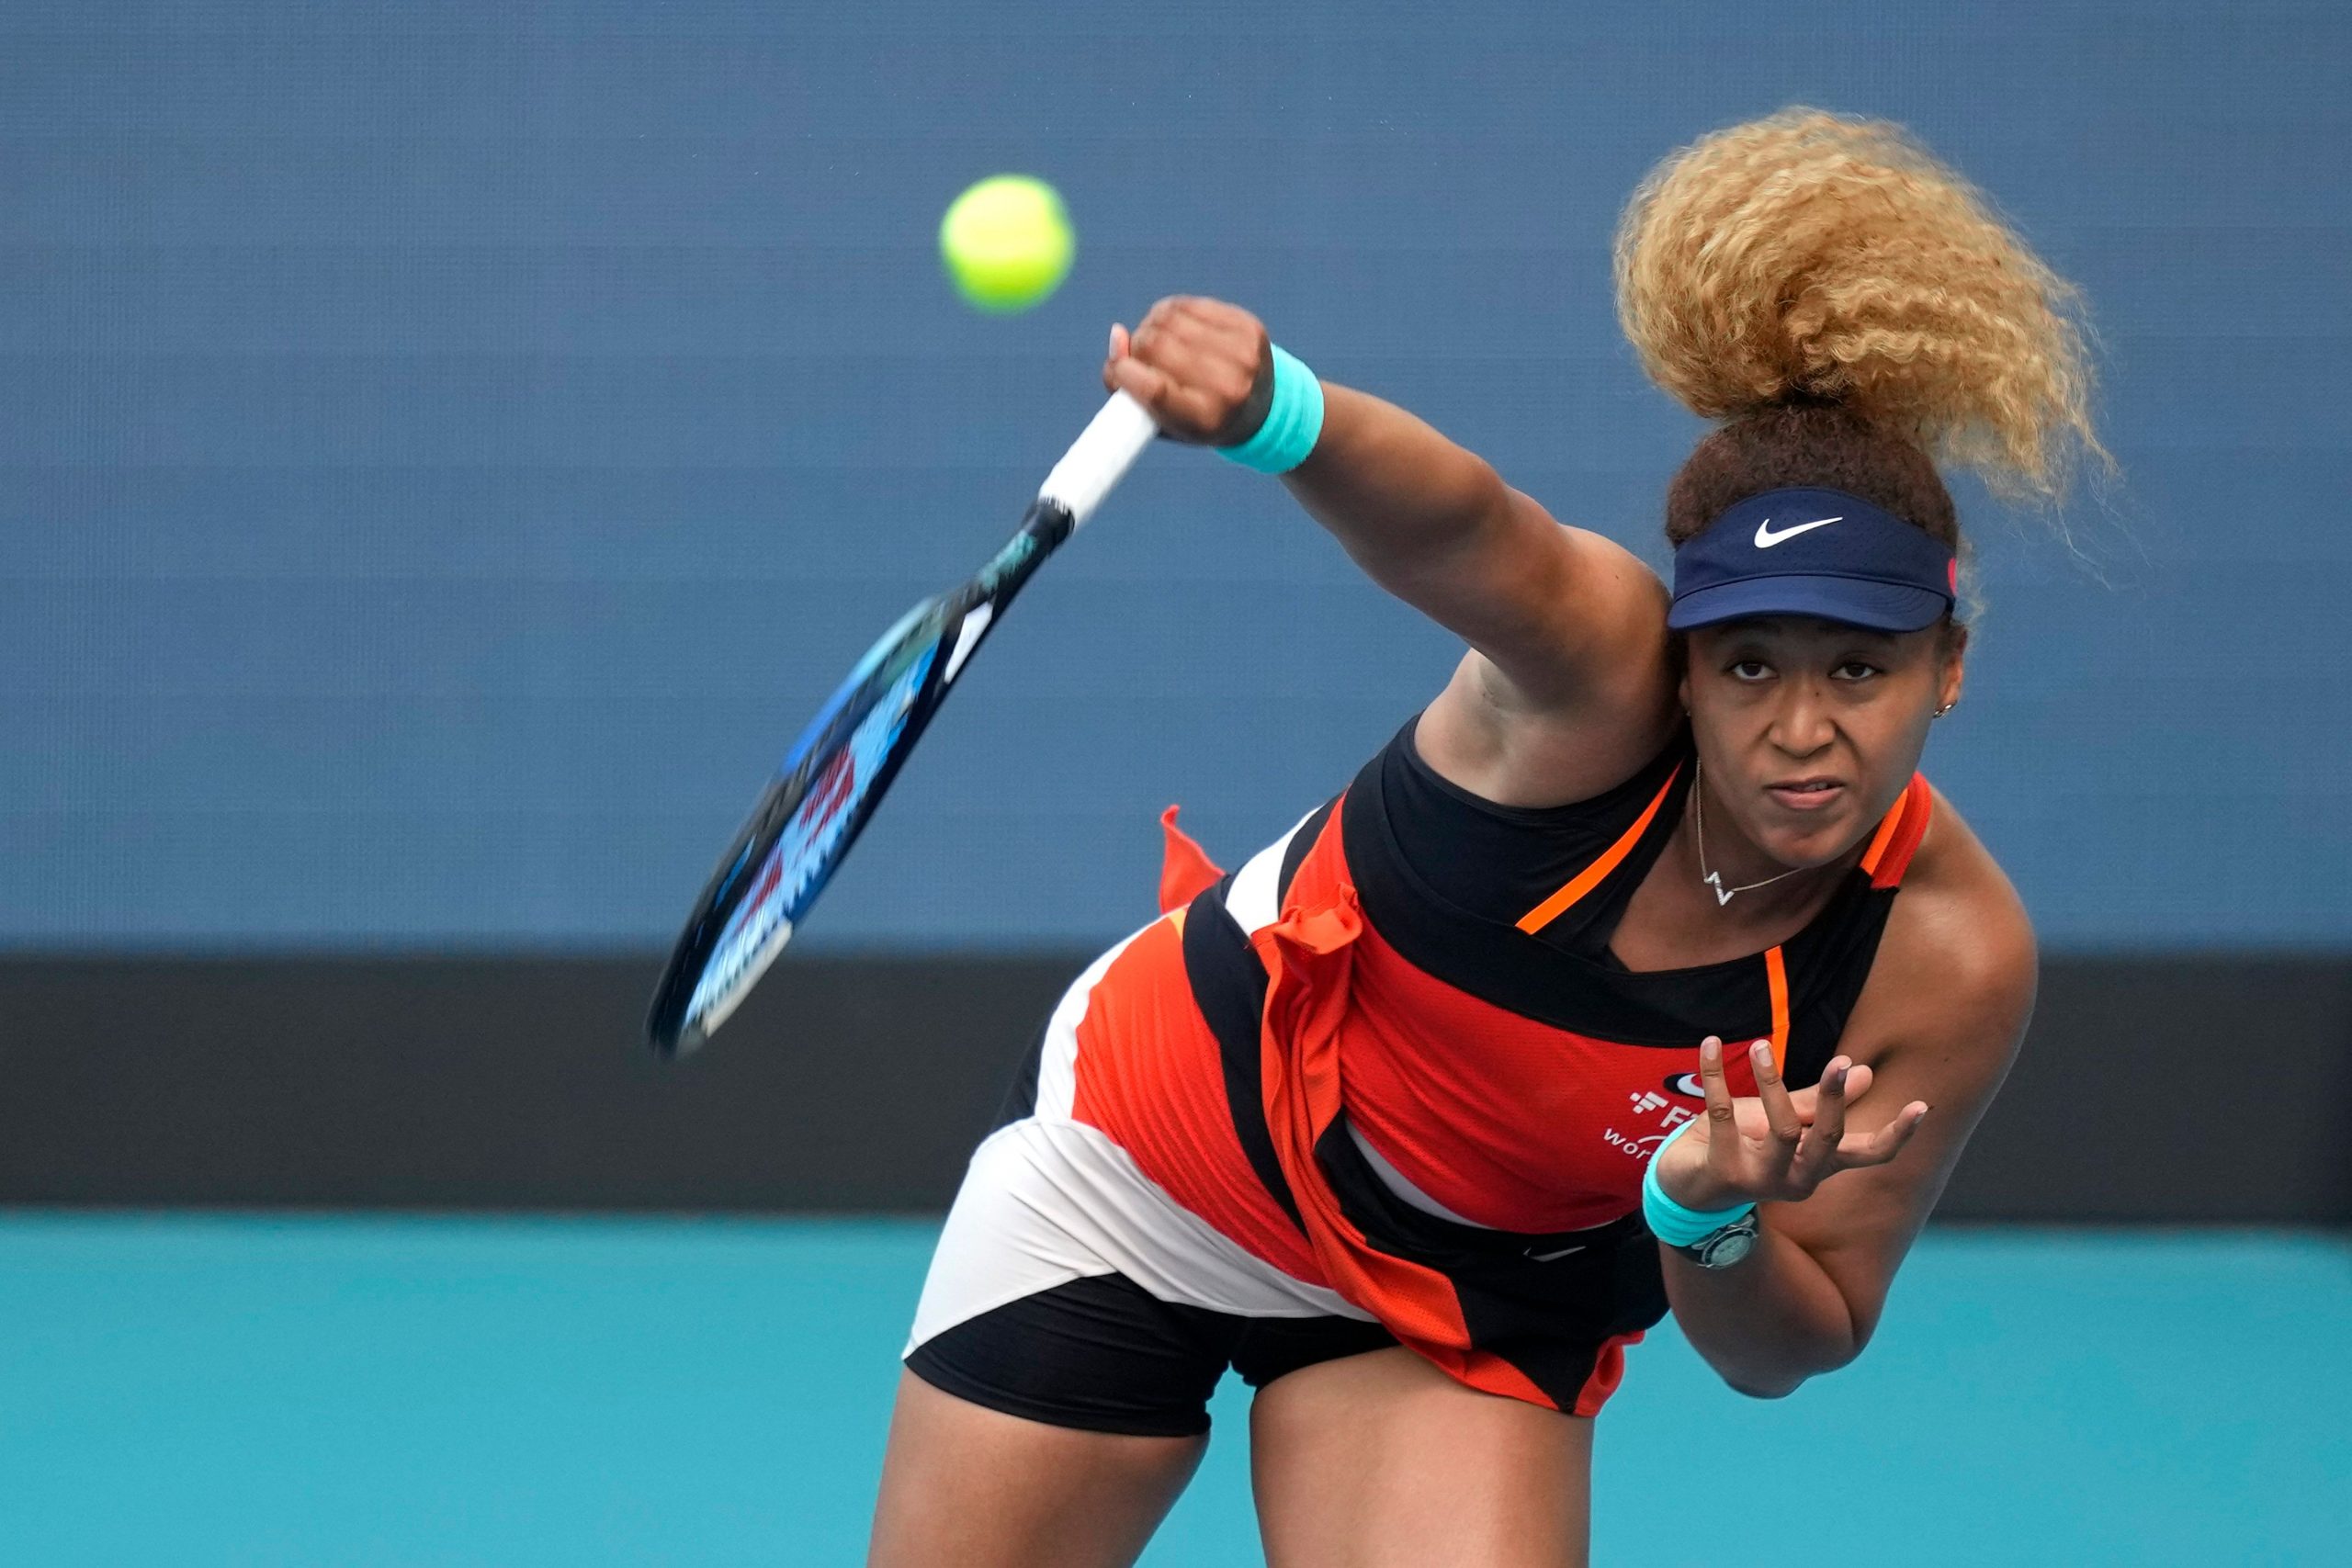 US Open 2022: Naomi Osaka crashes out in first round